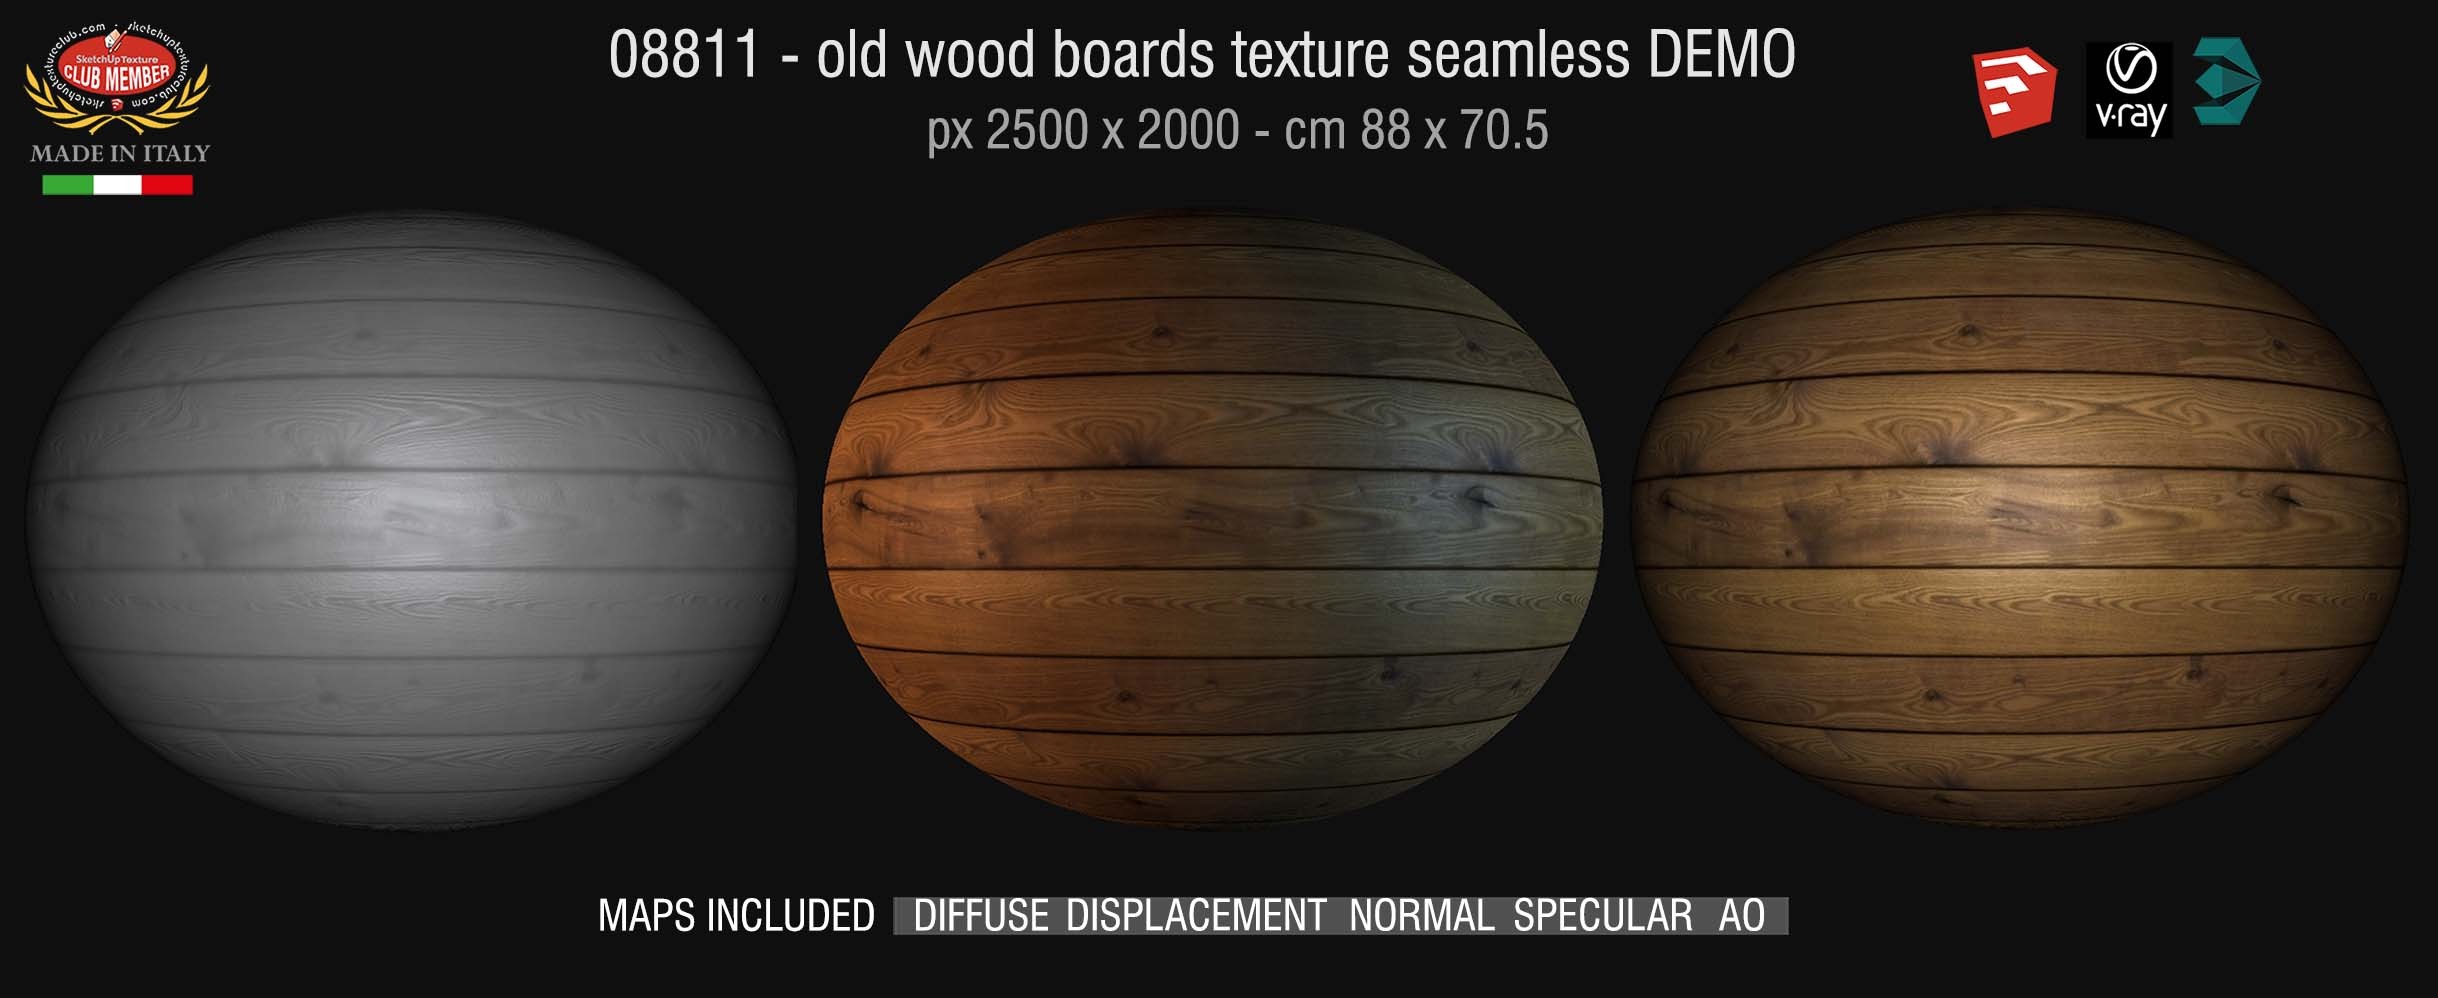 08811 - HR Old wood boards texture seamless + maps demo